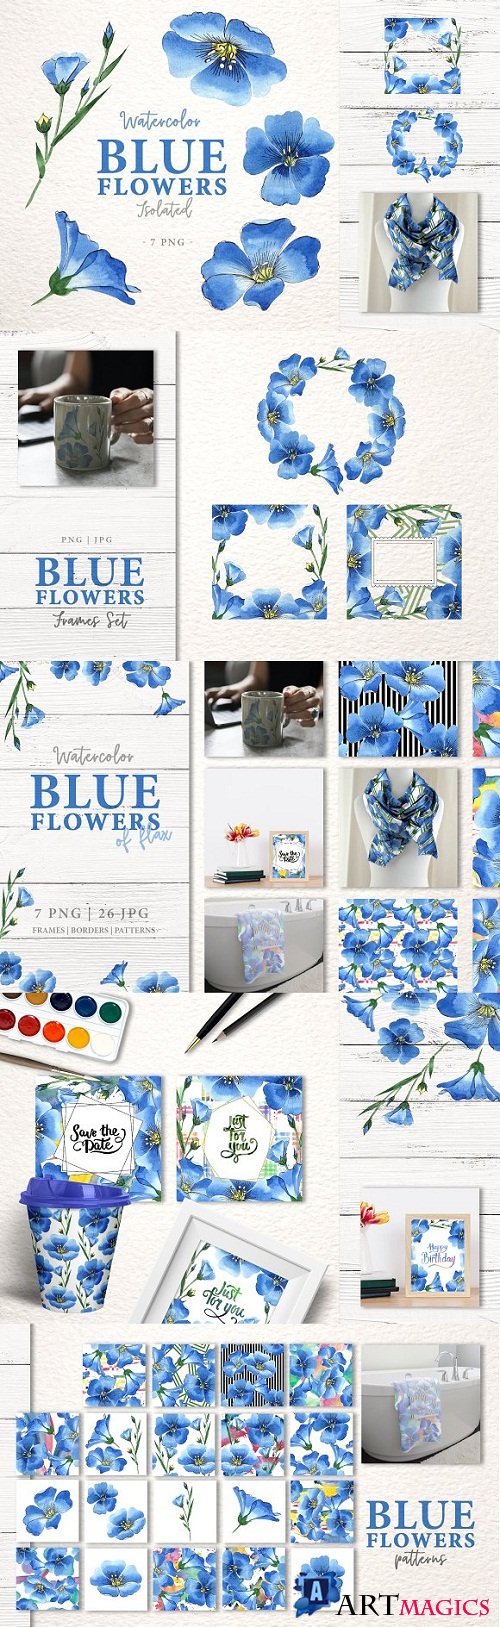 Blue flowers of flax Watercolor png - 3344724